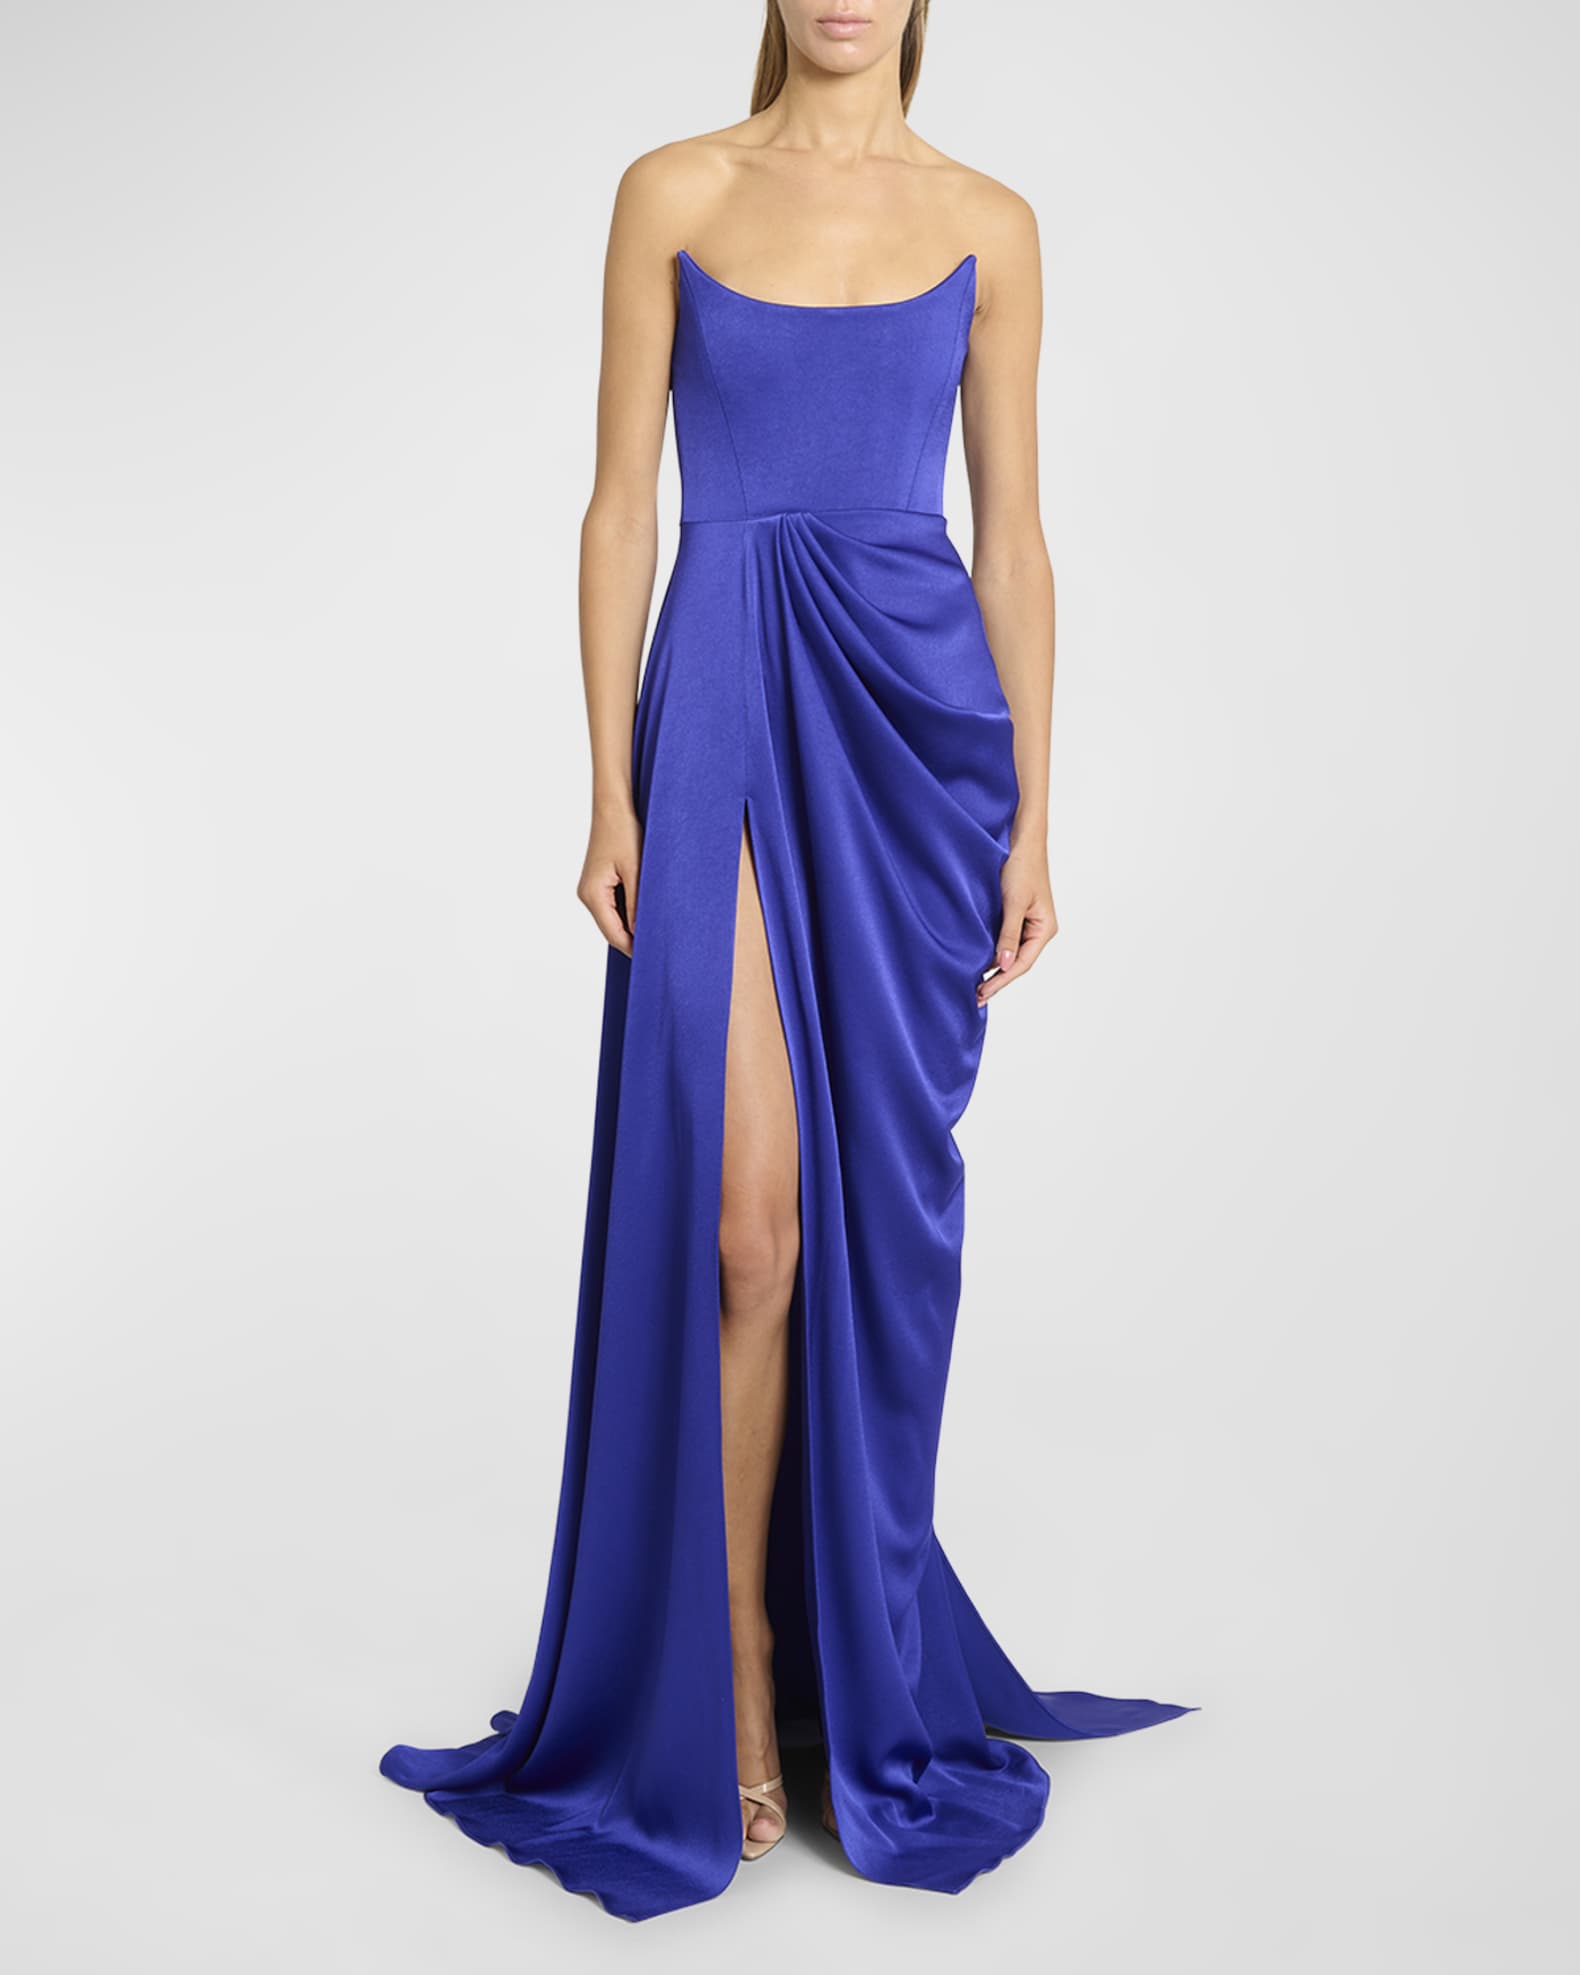 Alex Perry Curved Strapless Satin Crepe Drape Gown | Neiman Marcus